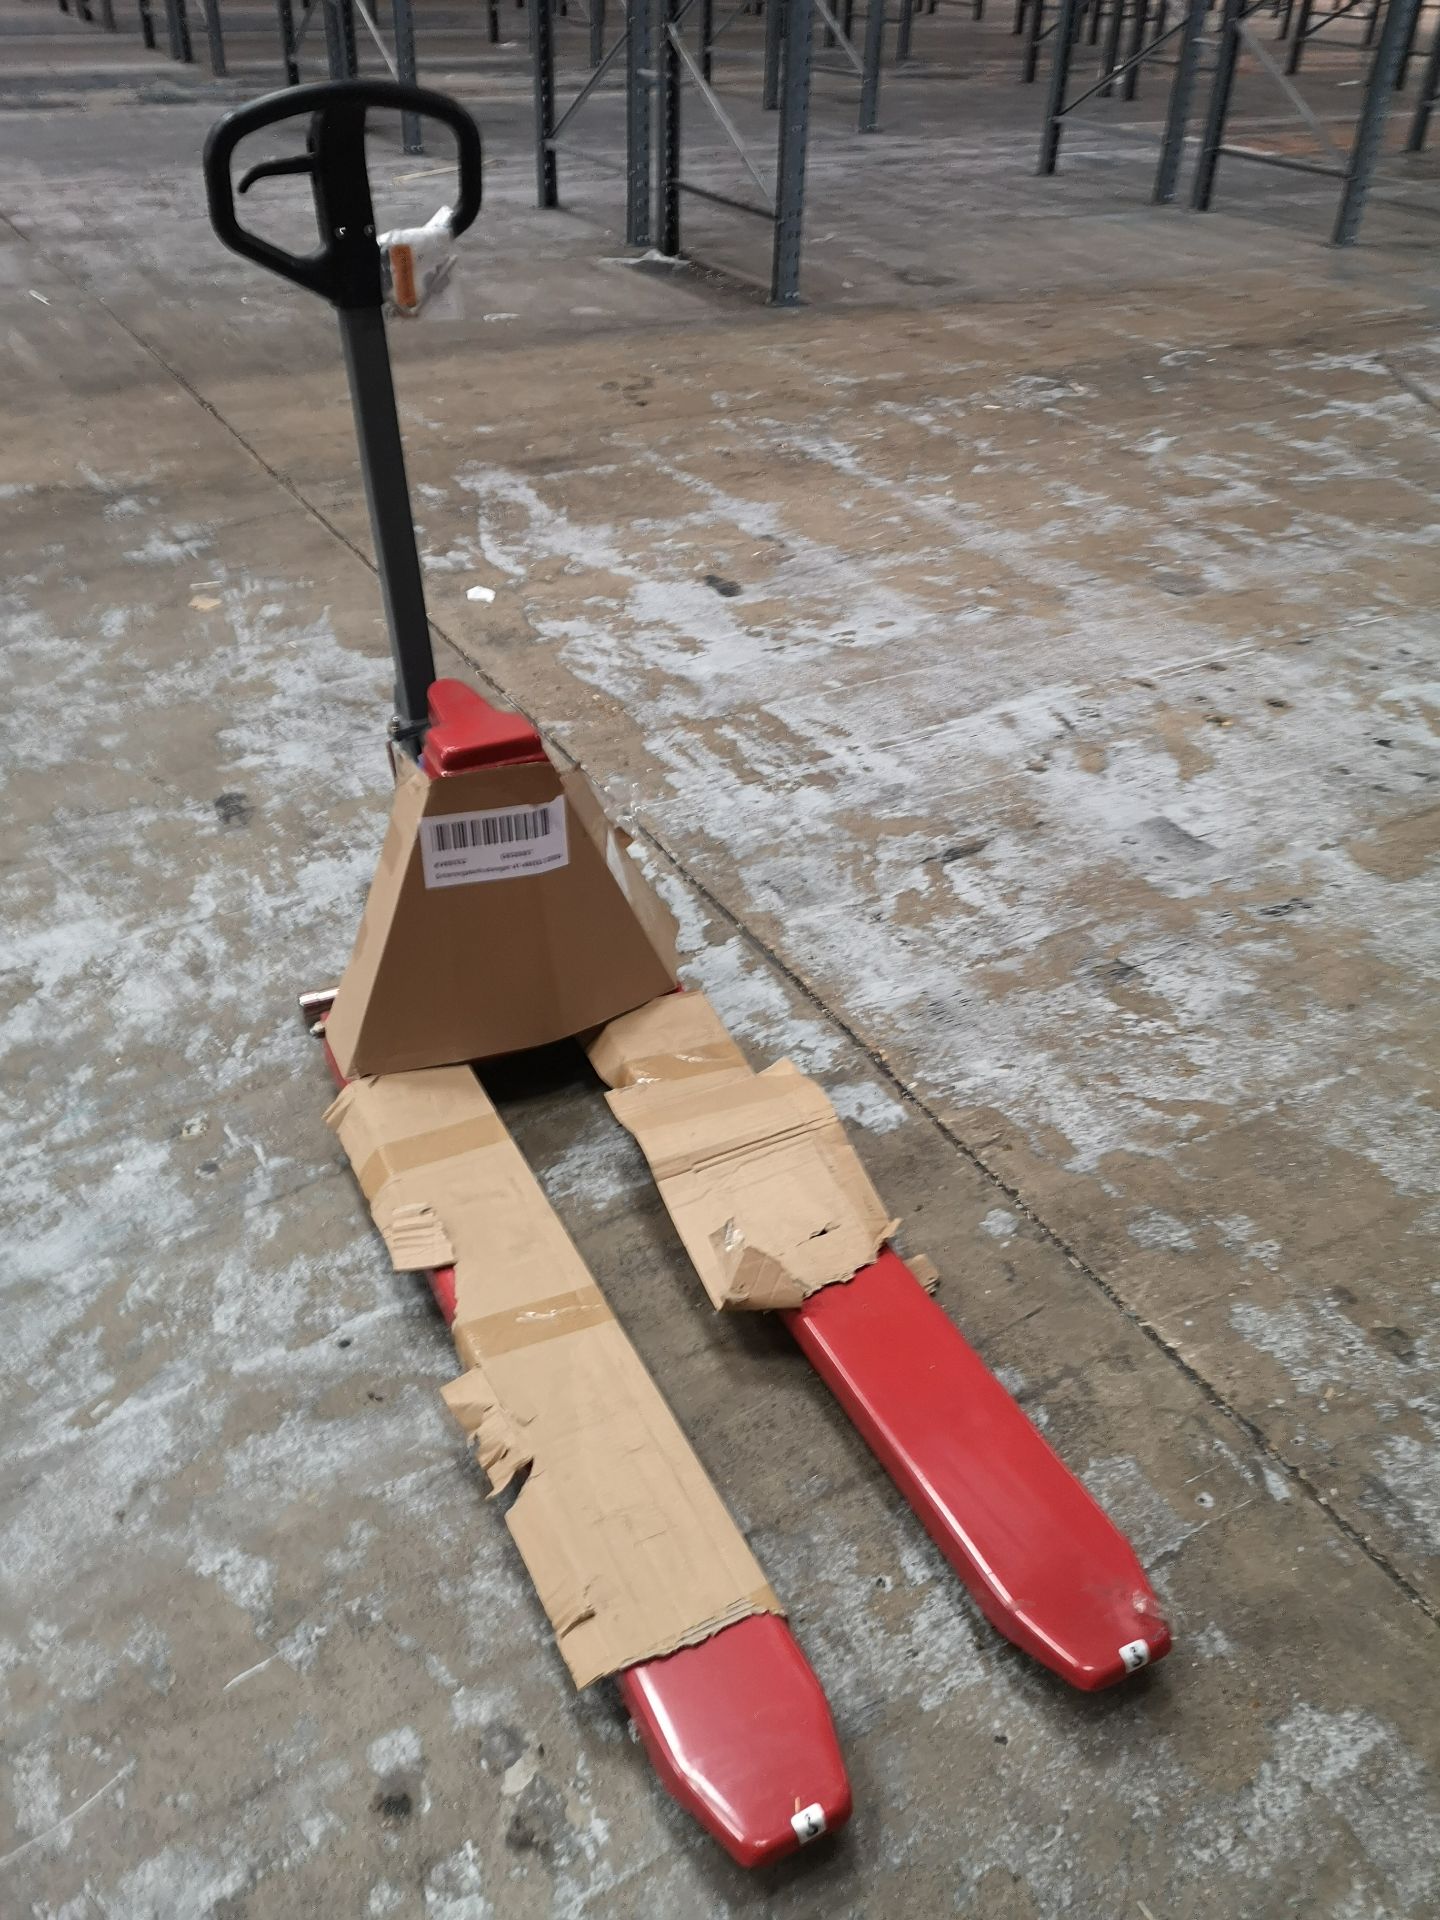 Quik Lift 1000kg High Lift Pallet TruckIn new condition - Image 2 of 4